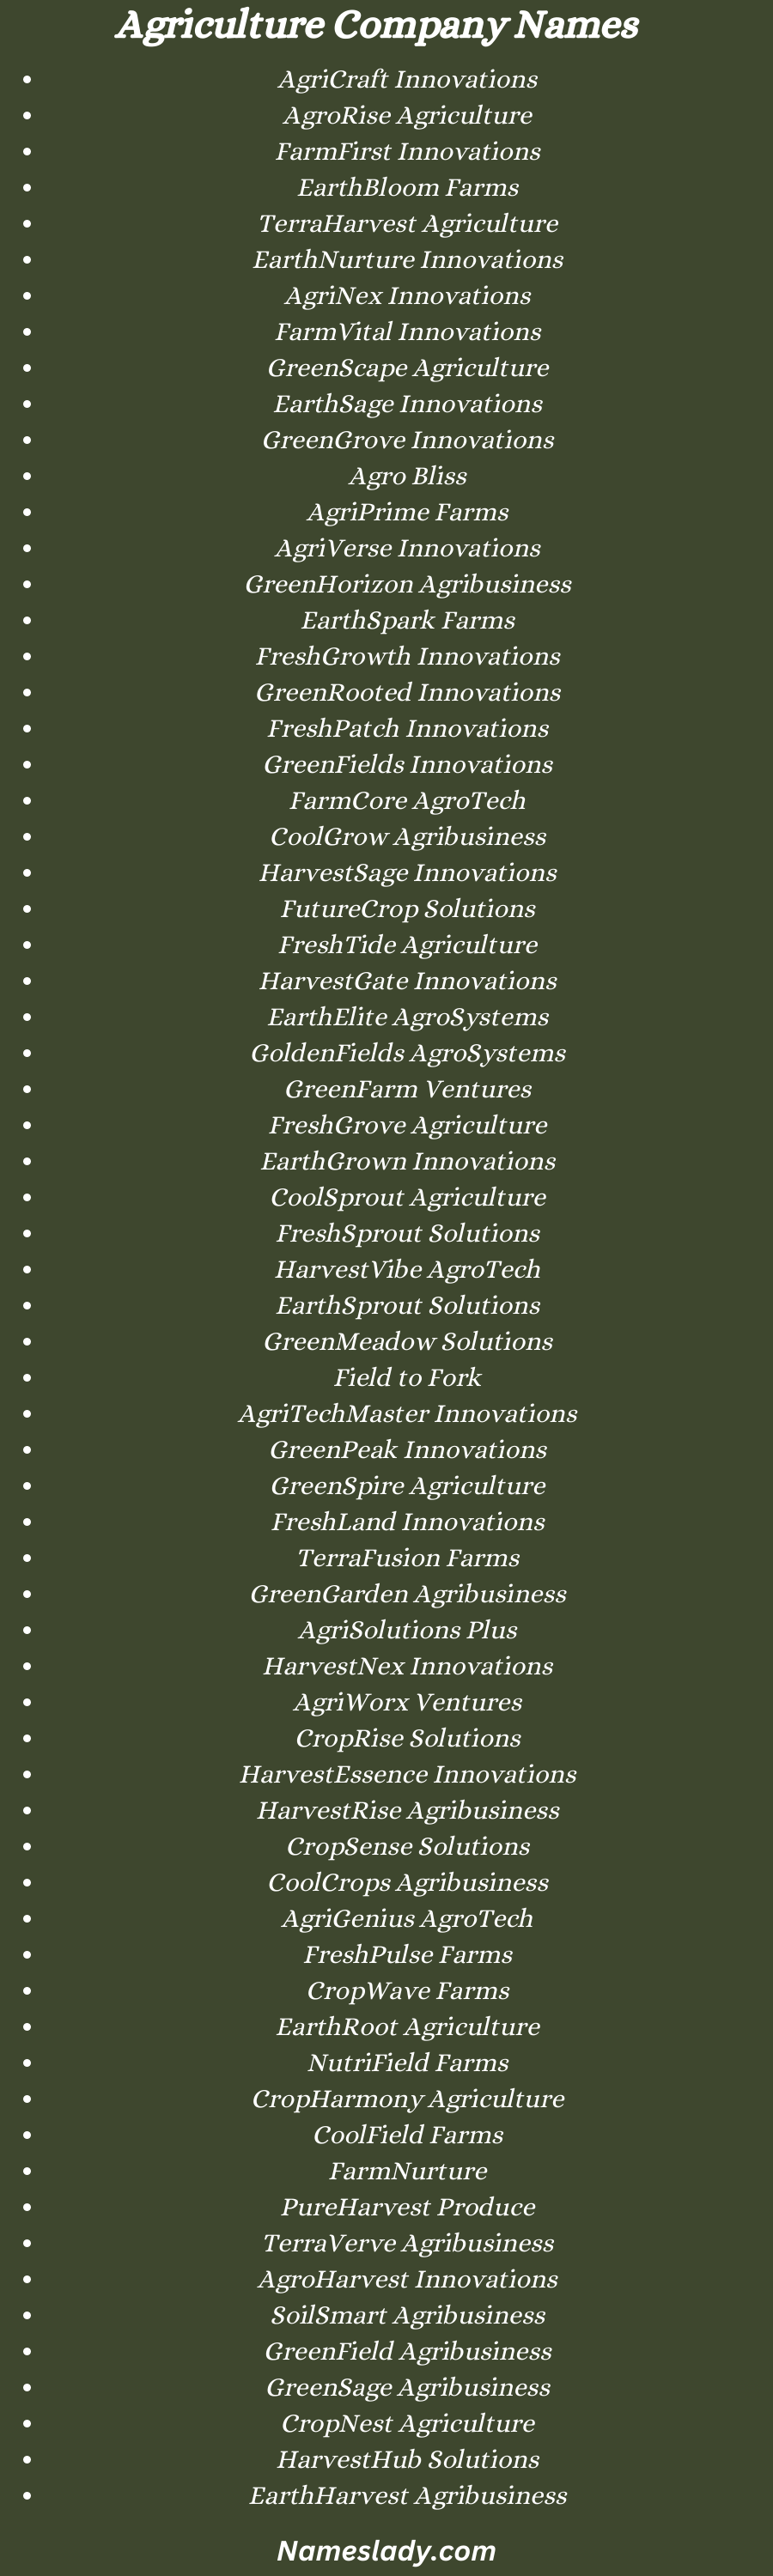 Agriculture Company Names